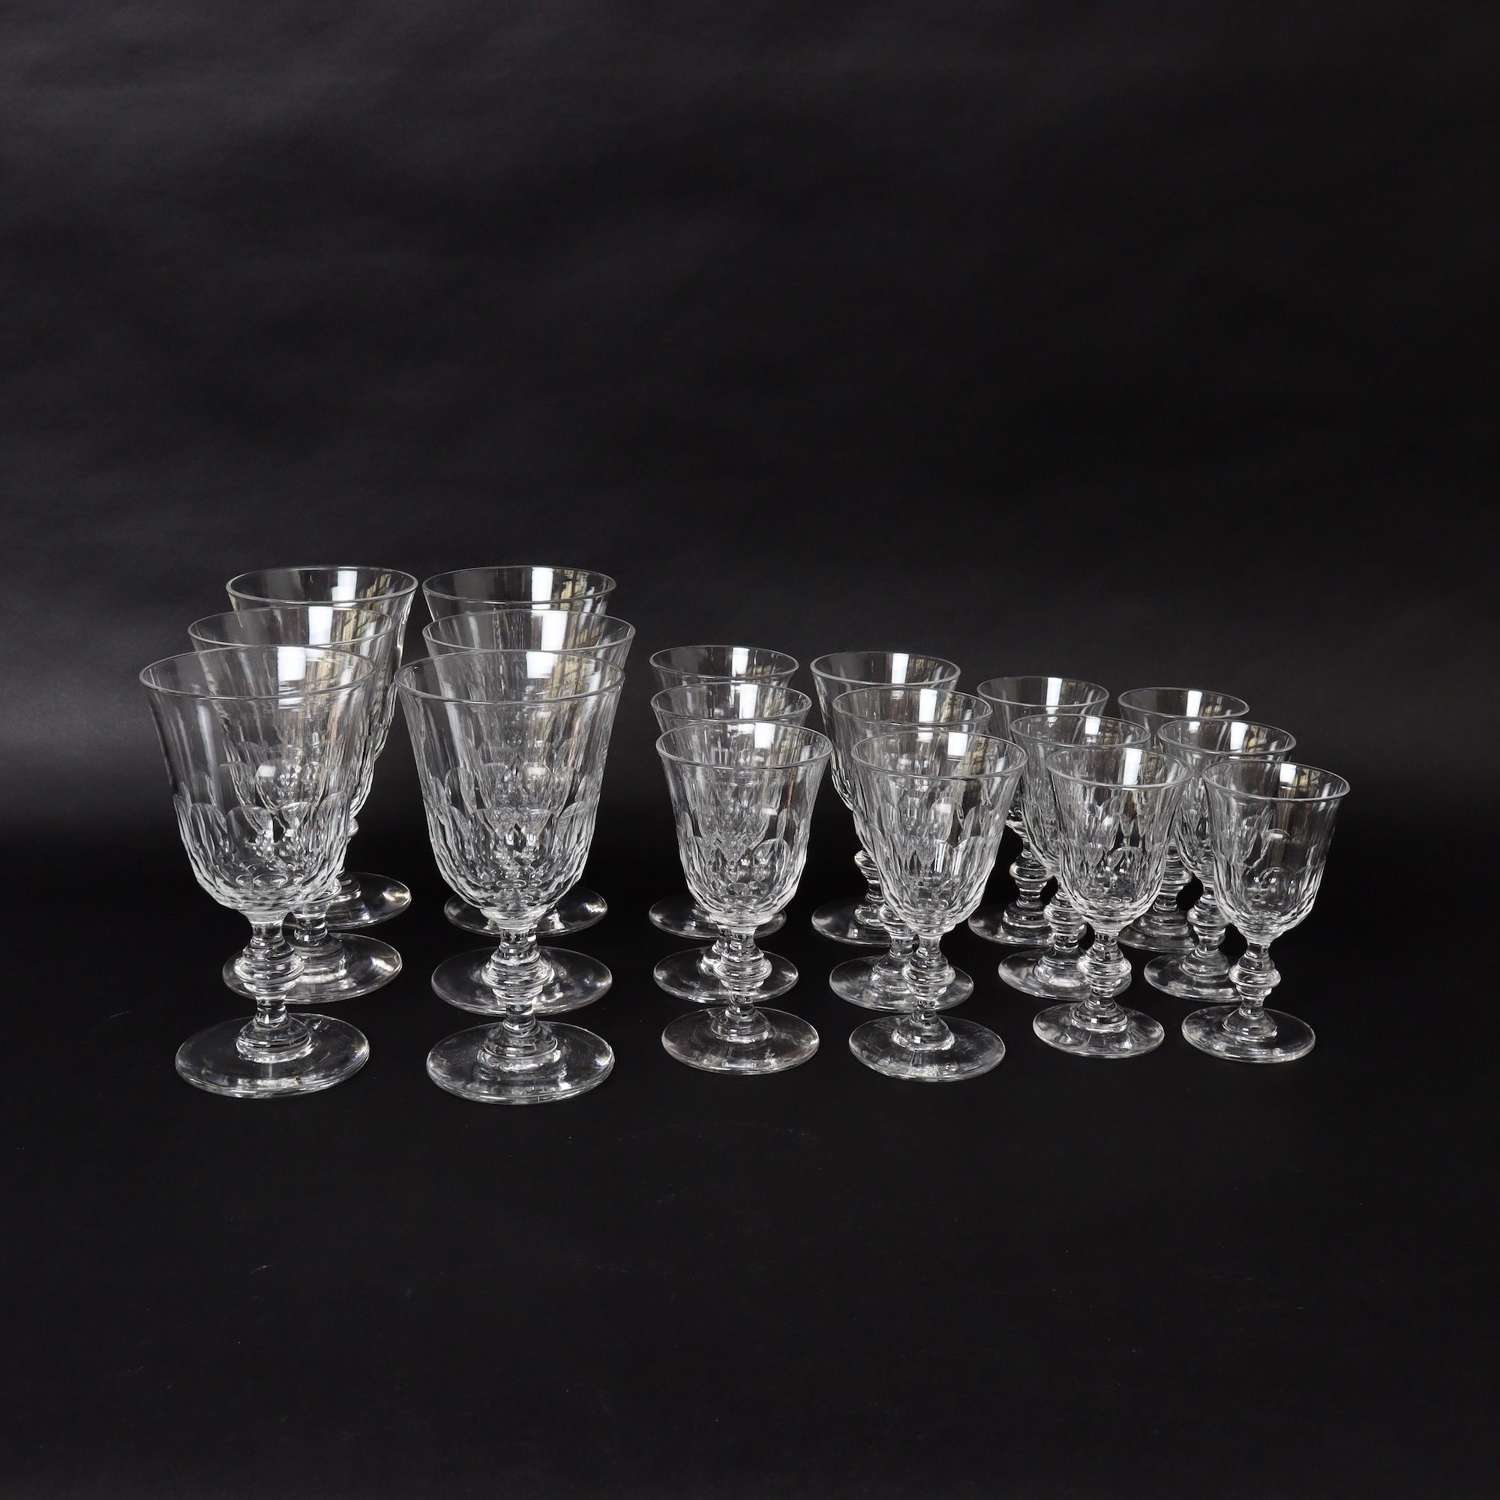 Suite of Baccarat Crystal Glasses